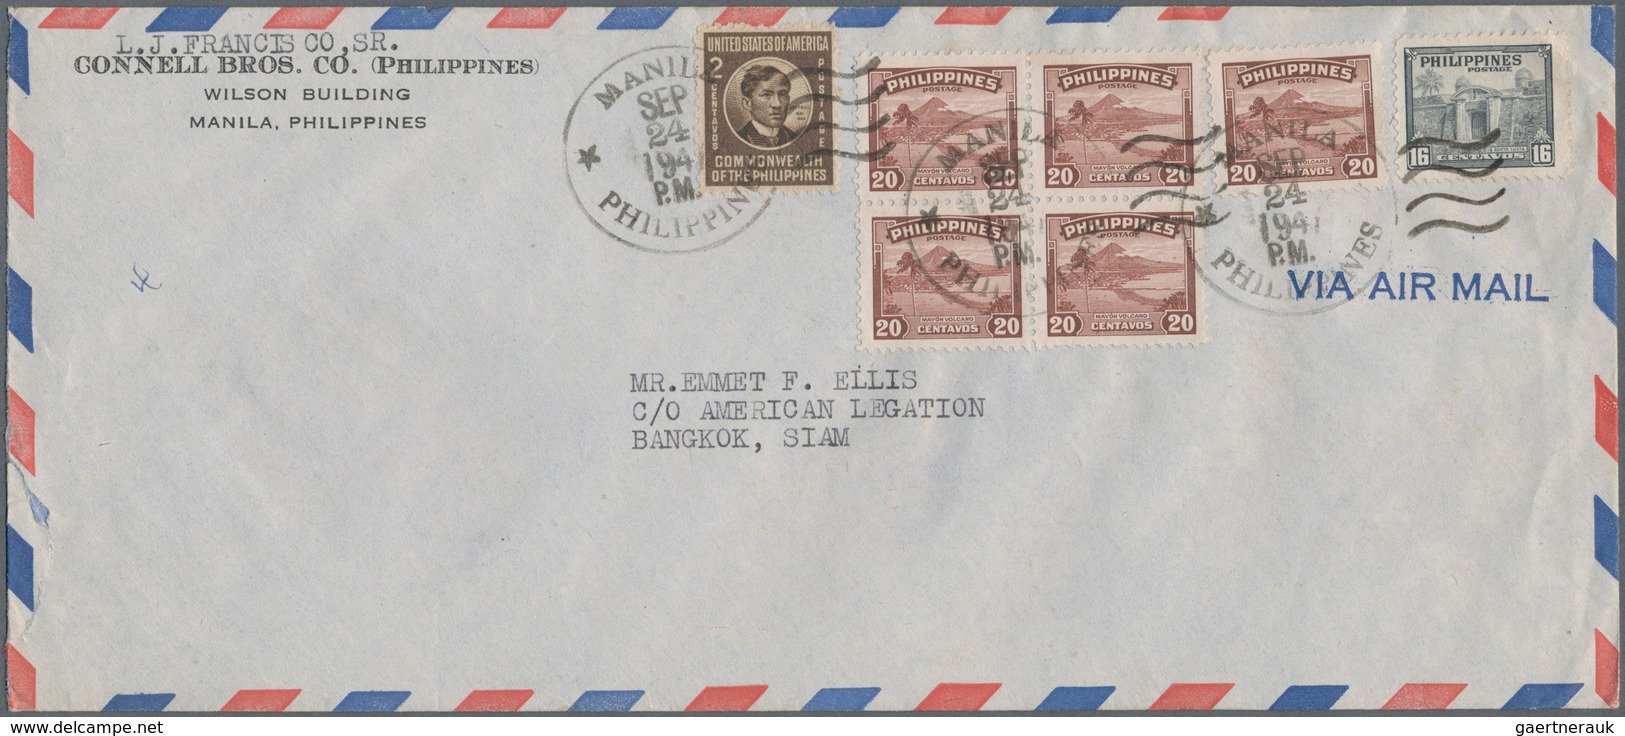 Philippinen: 1946-47 Nine covers from the Philippines, three from the U.S.A. and two from Canada all